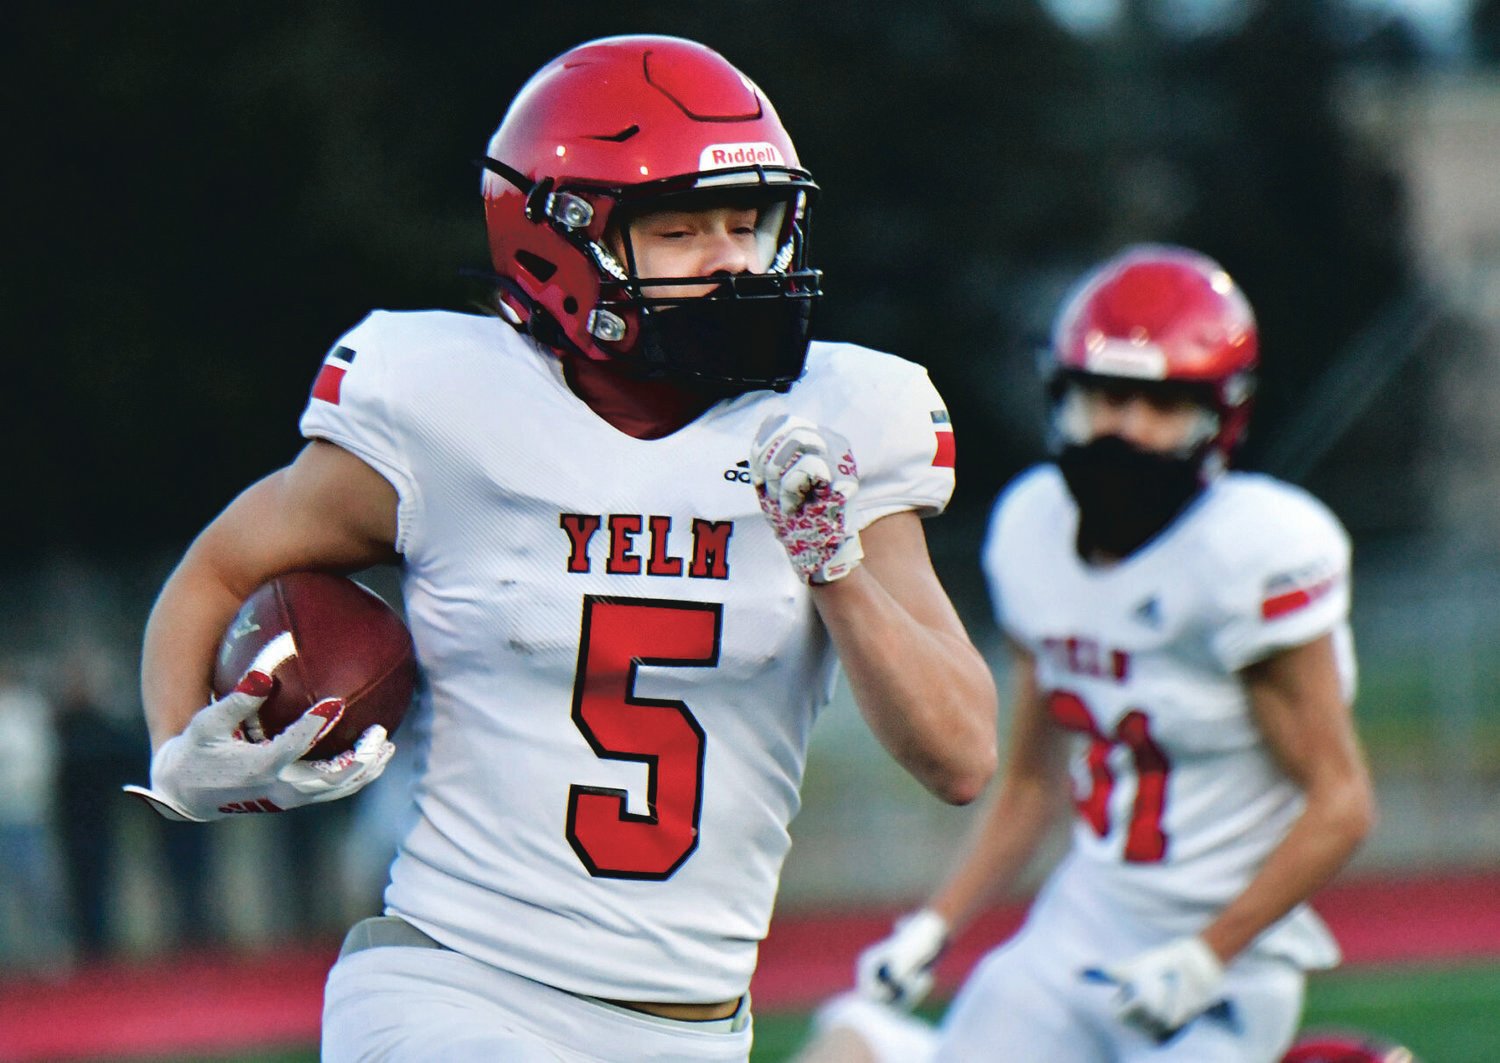 Yelm High School wide receiver Kyler Ronquillo jets upfield on Feb. 26, against River Ridge High School at South Sound Stadium.